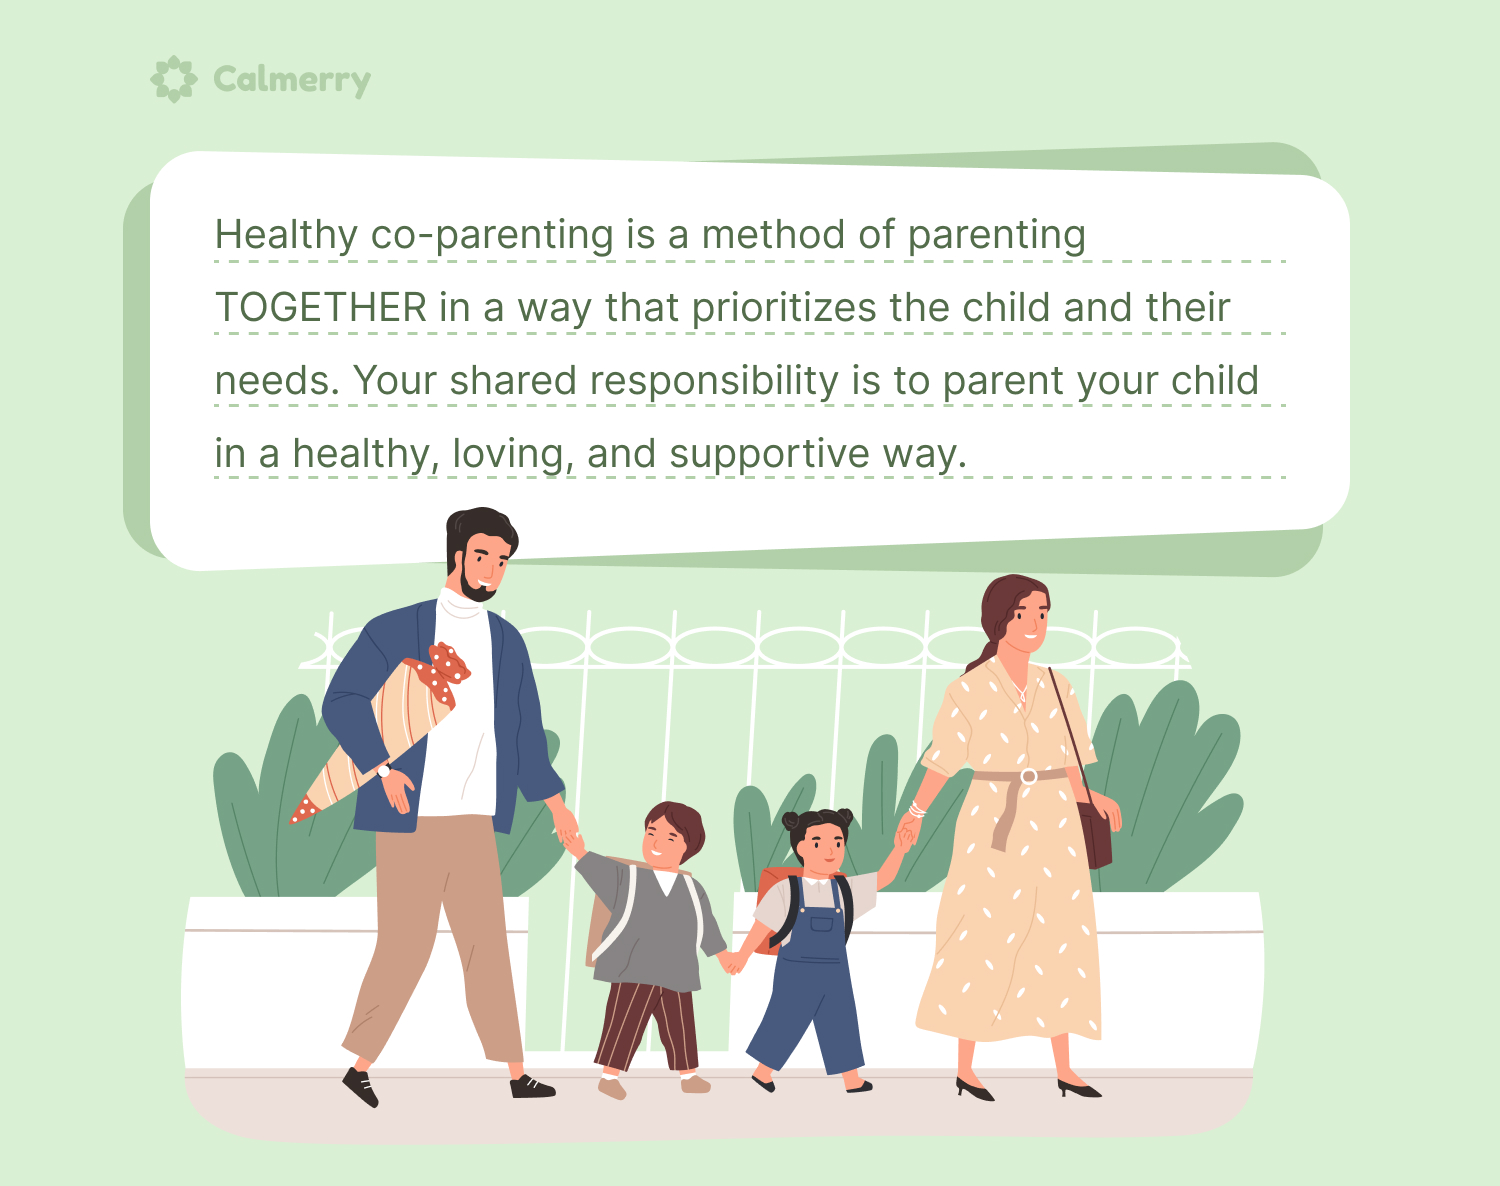 Healthy co-parenting is a method of parenting TOGETHER in a way that prioritizes the child and their needs. 